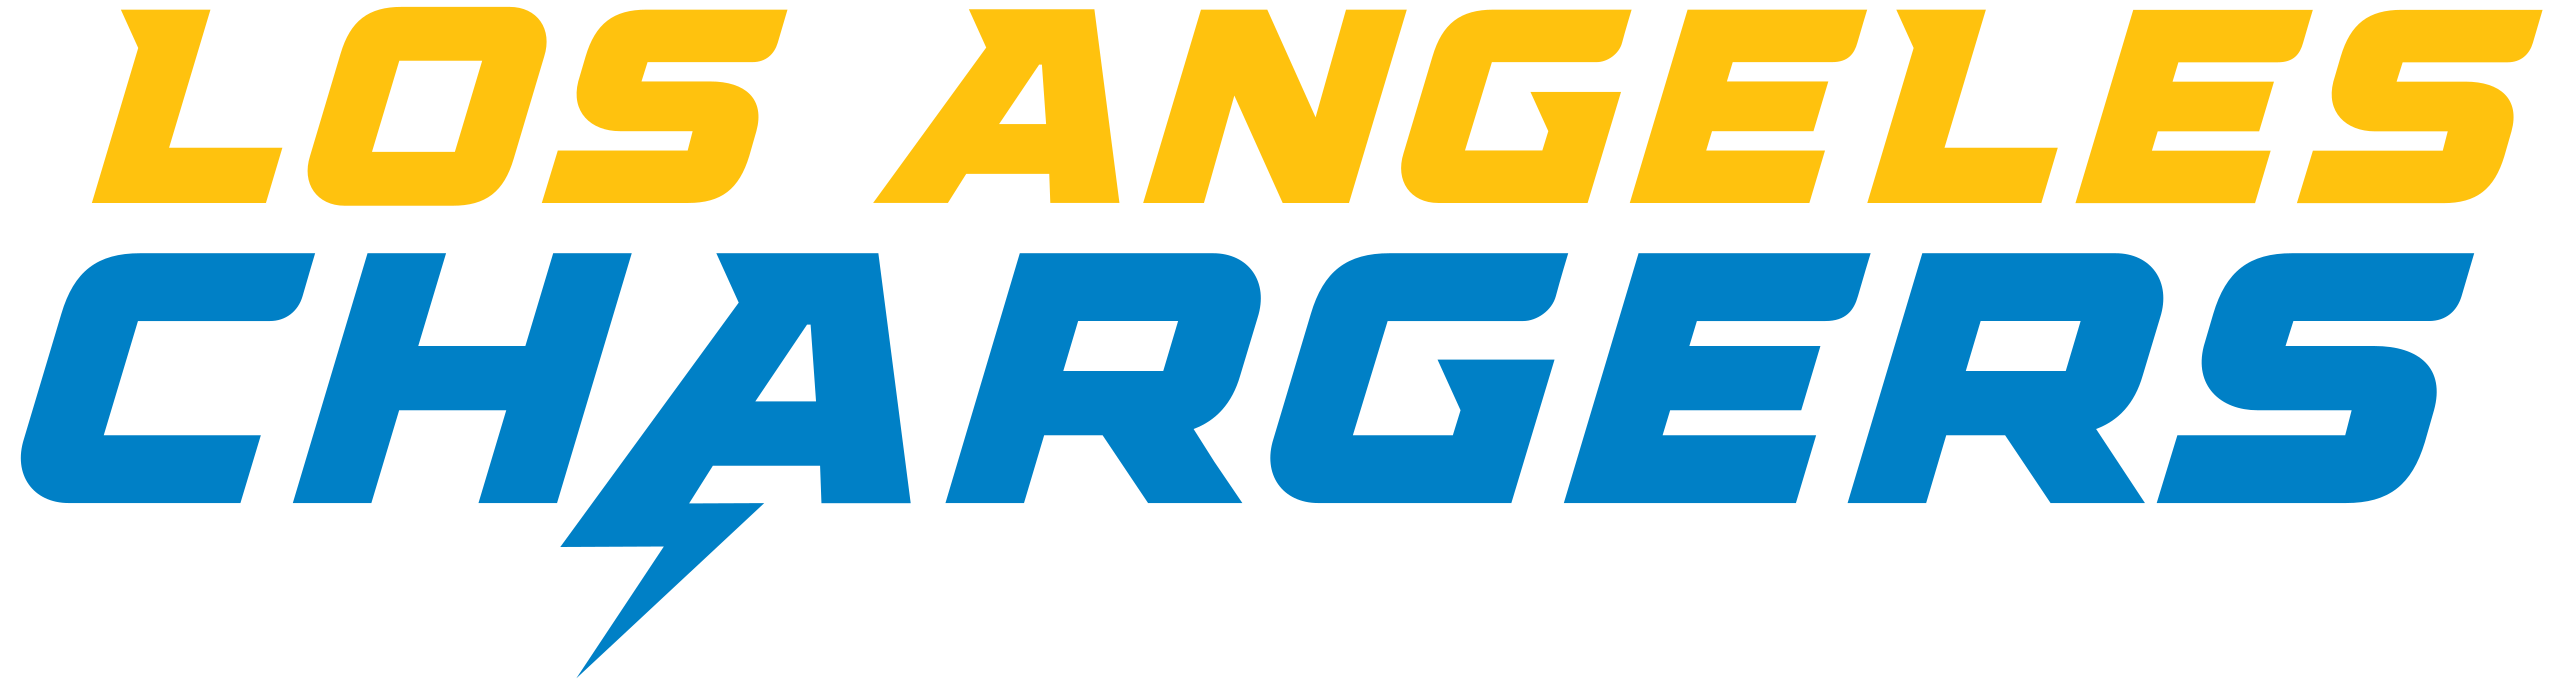 File:Los Angeles Chargers 2020 wordmark.svg - Wikipedia